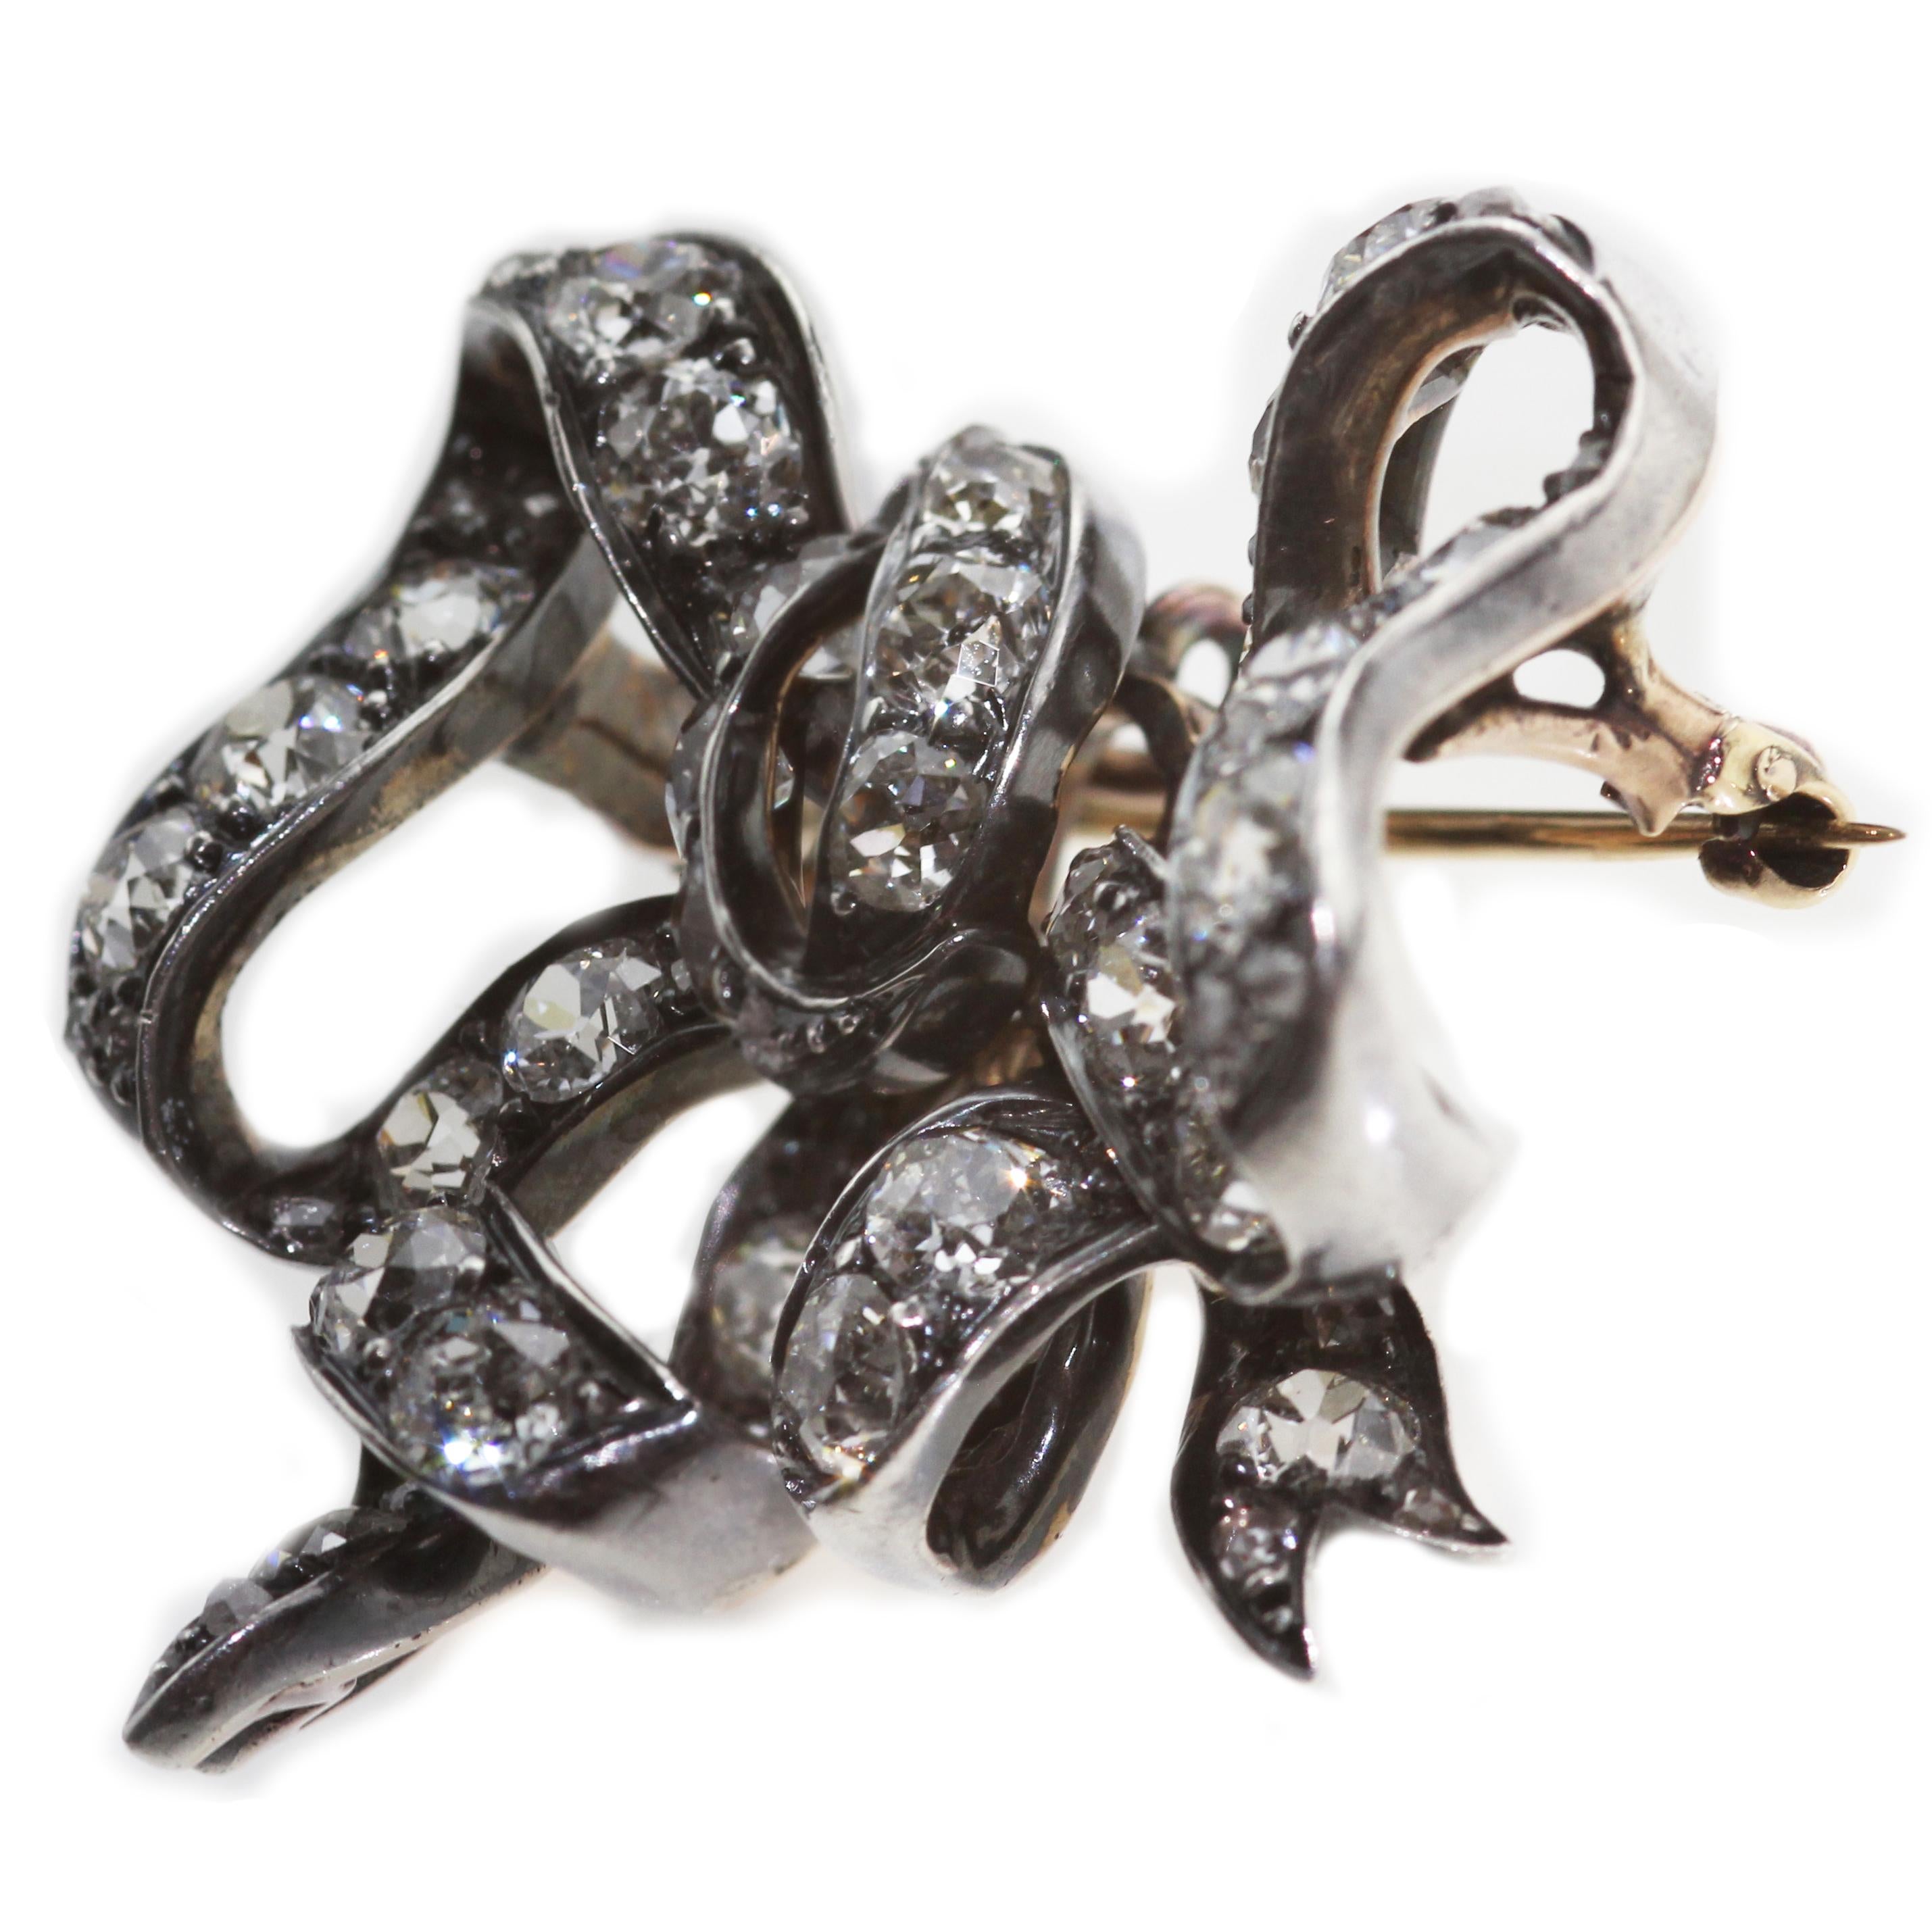 A Victorian diamond bow brooch pendant, could be able to wear as a brooch or pendant. Classic Victorian design with raised bow, set in silver top with gold backing. Diamonds are good quality and it is rare to find good quality  diamonds in the